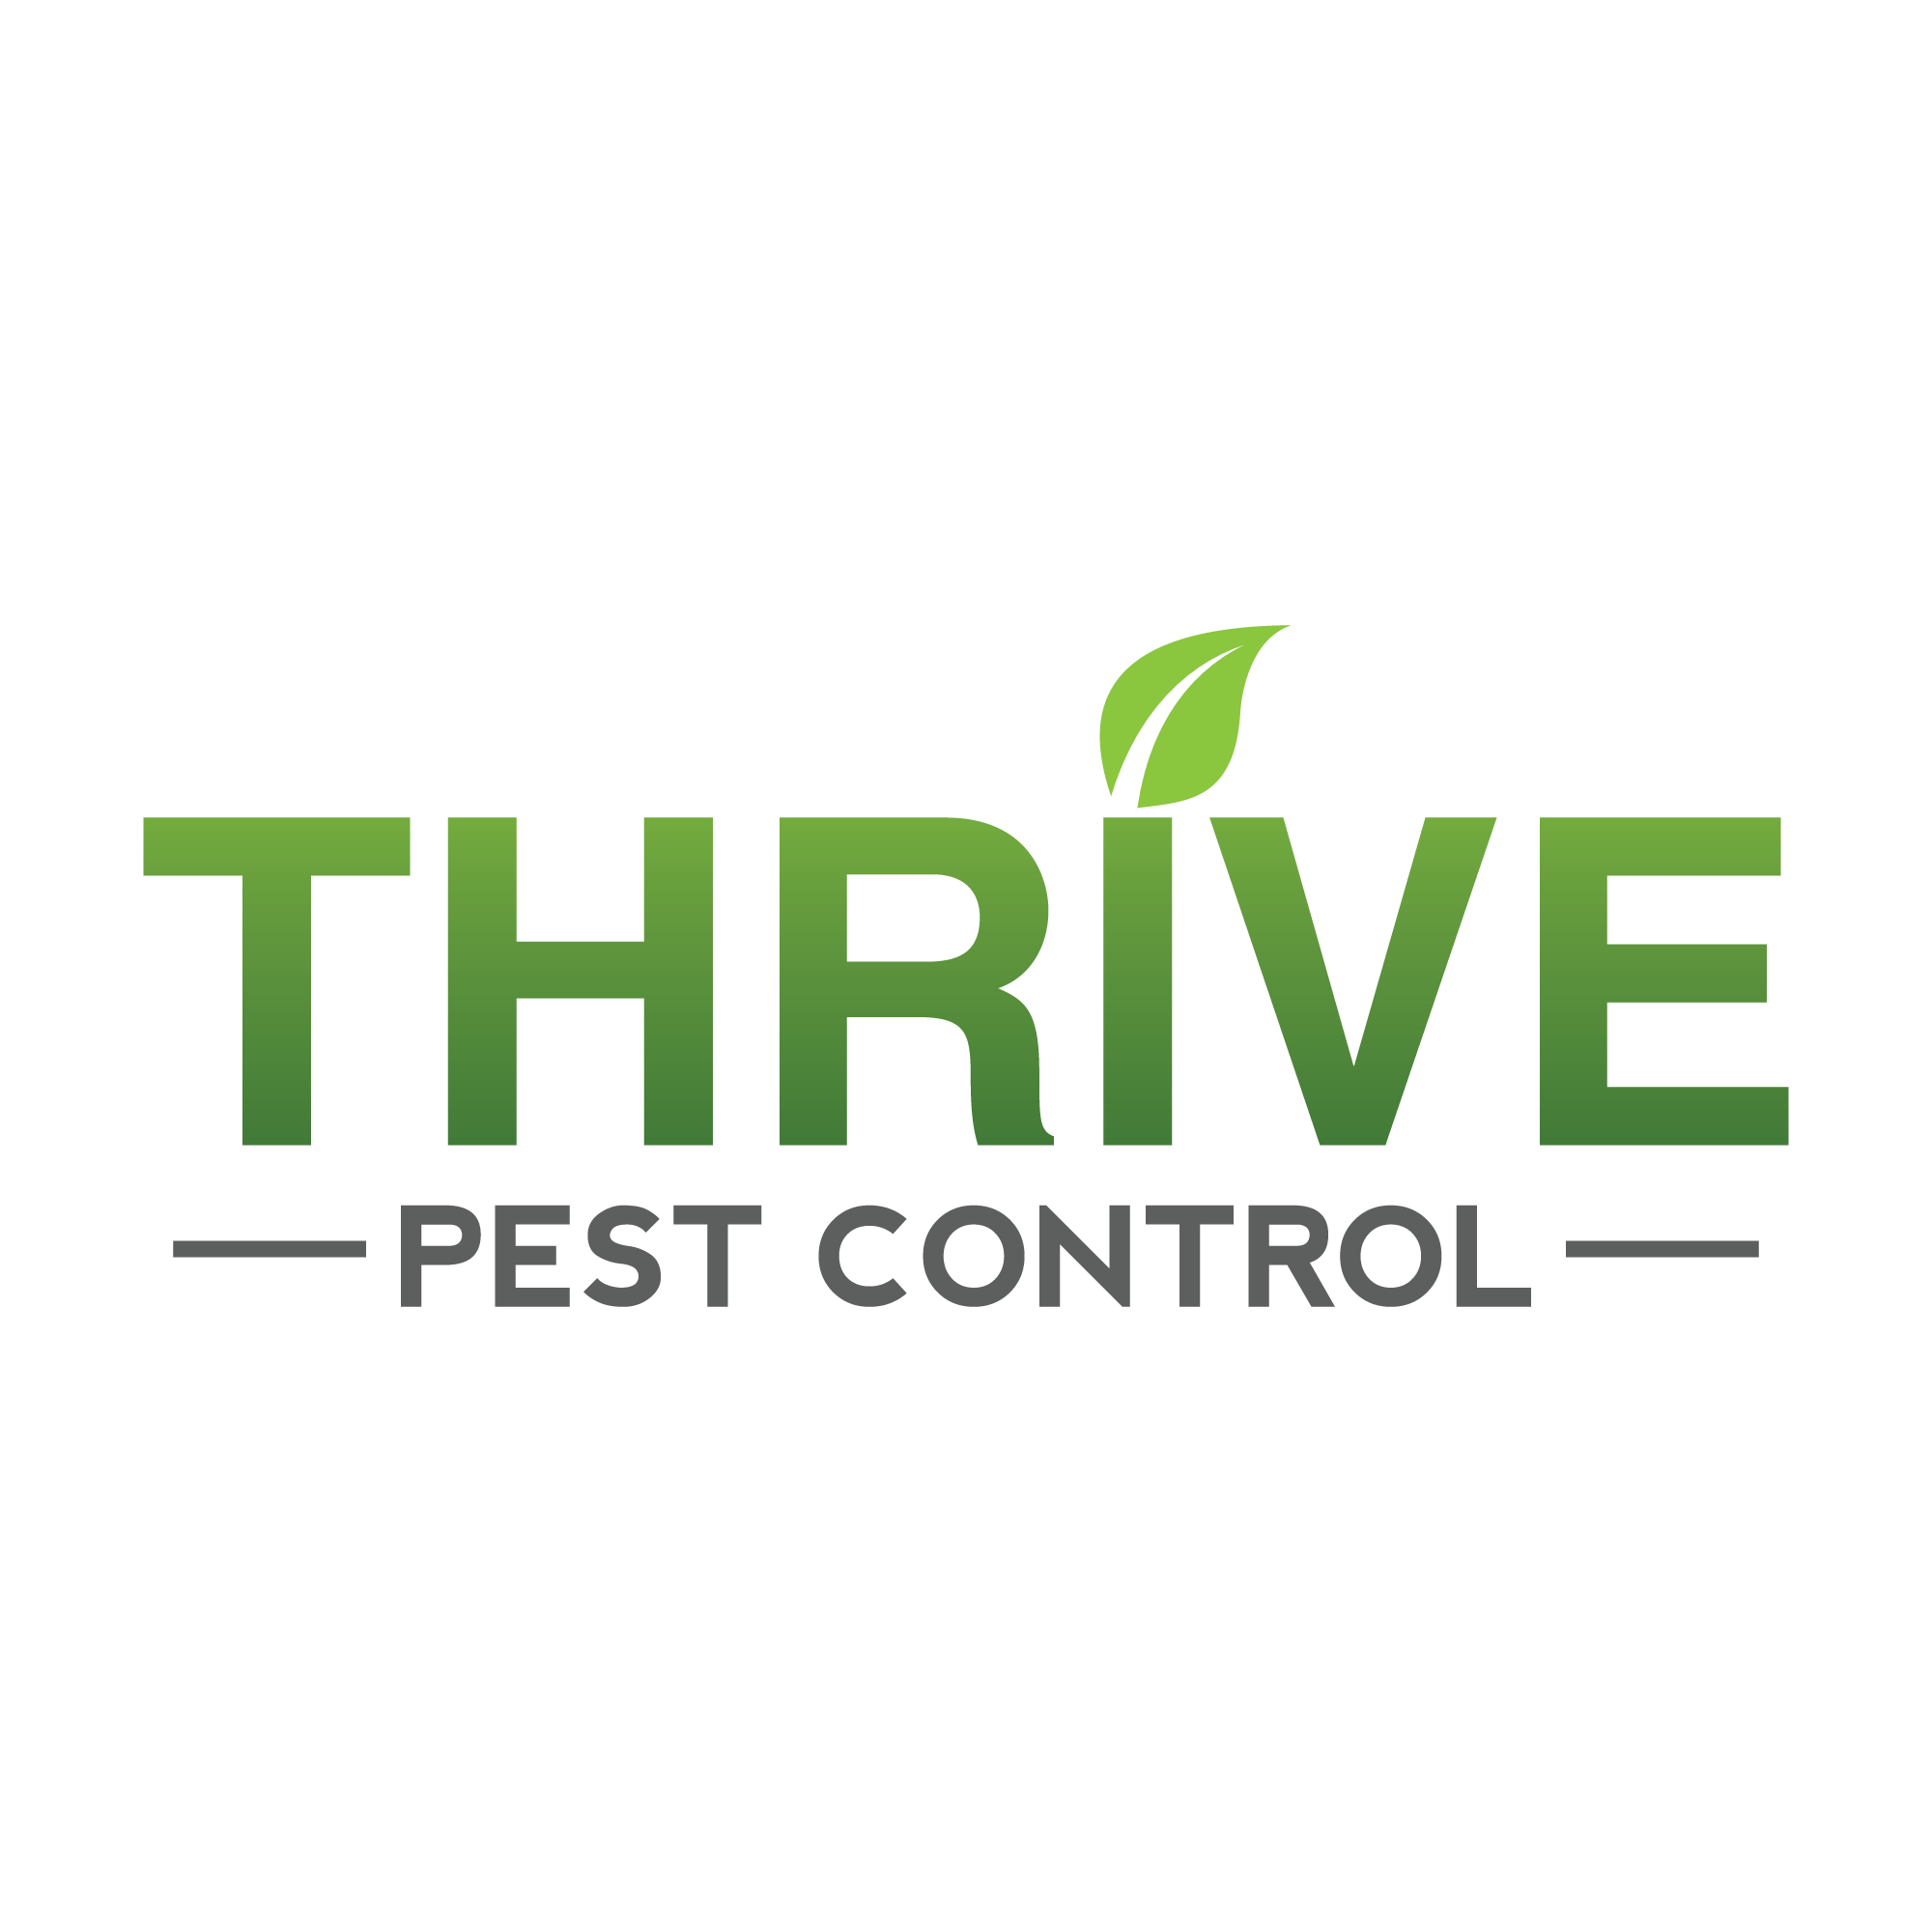 Thrive Pest Control Serving Nashville and surronding areas.